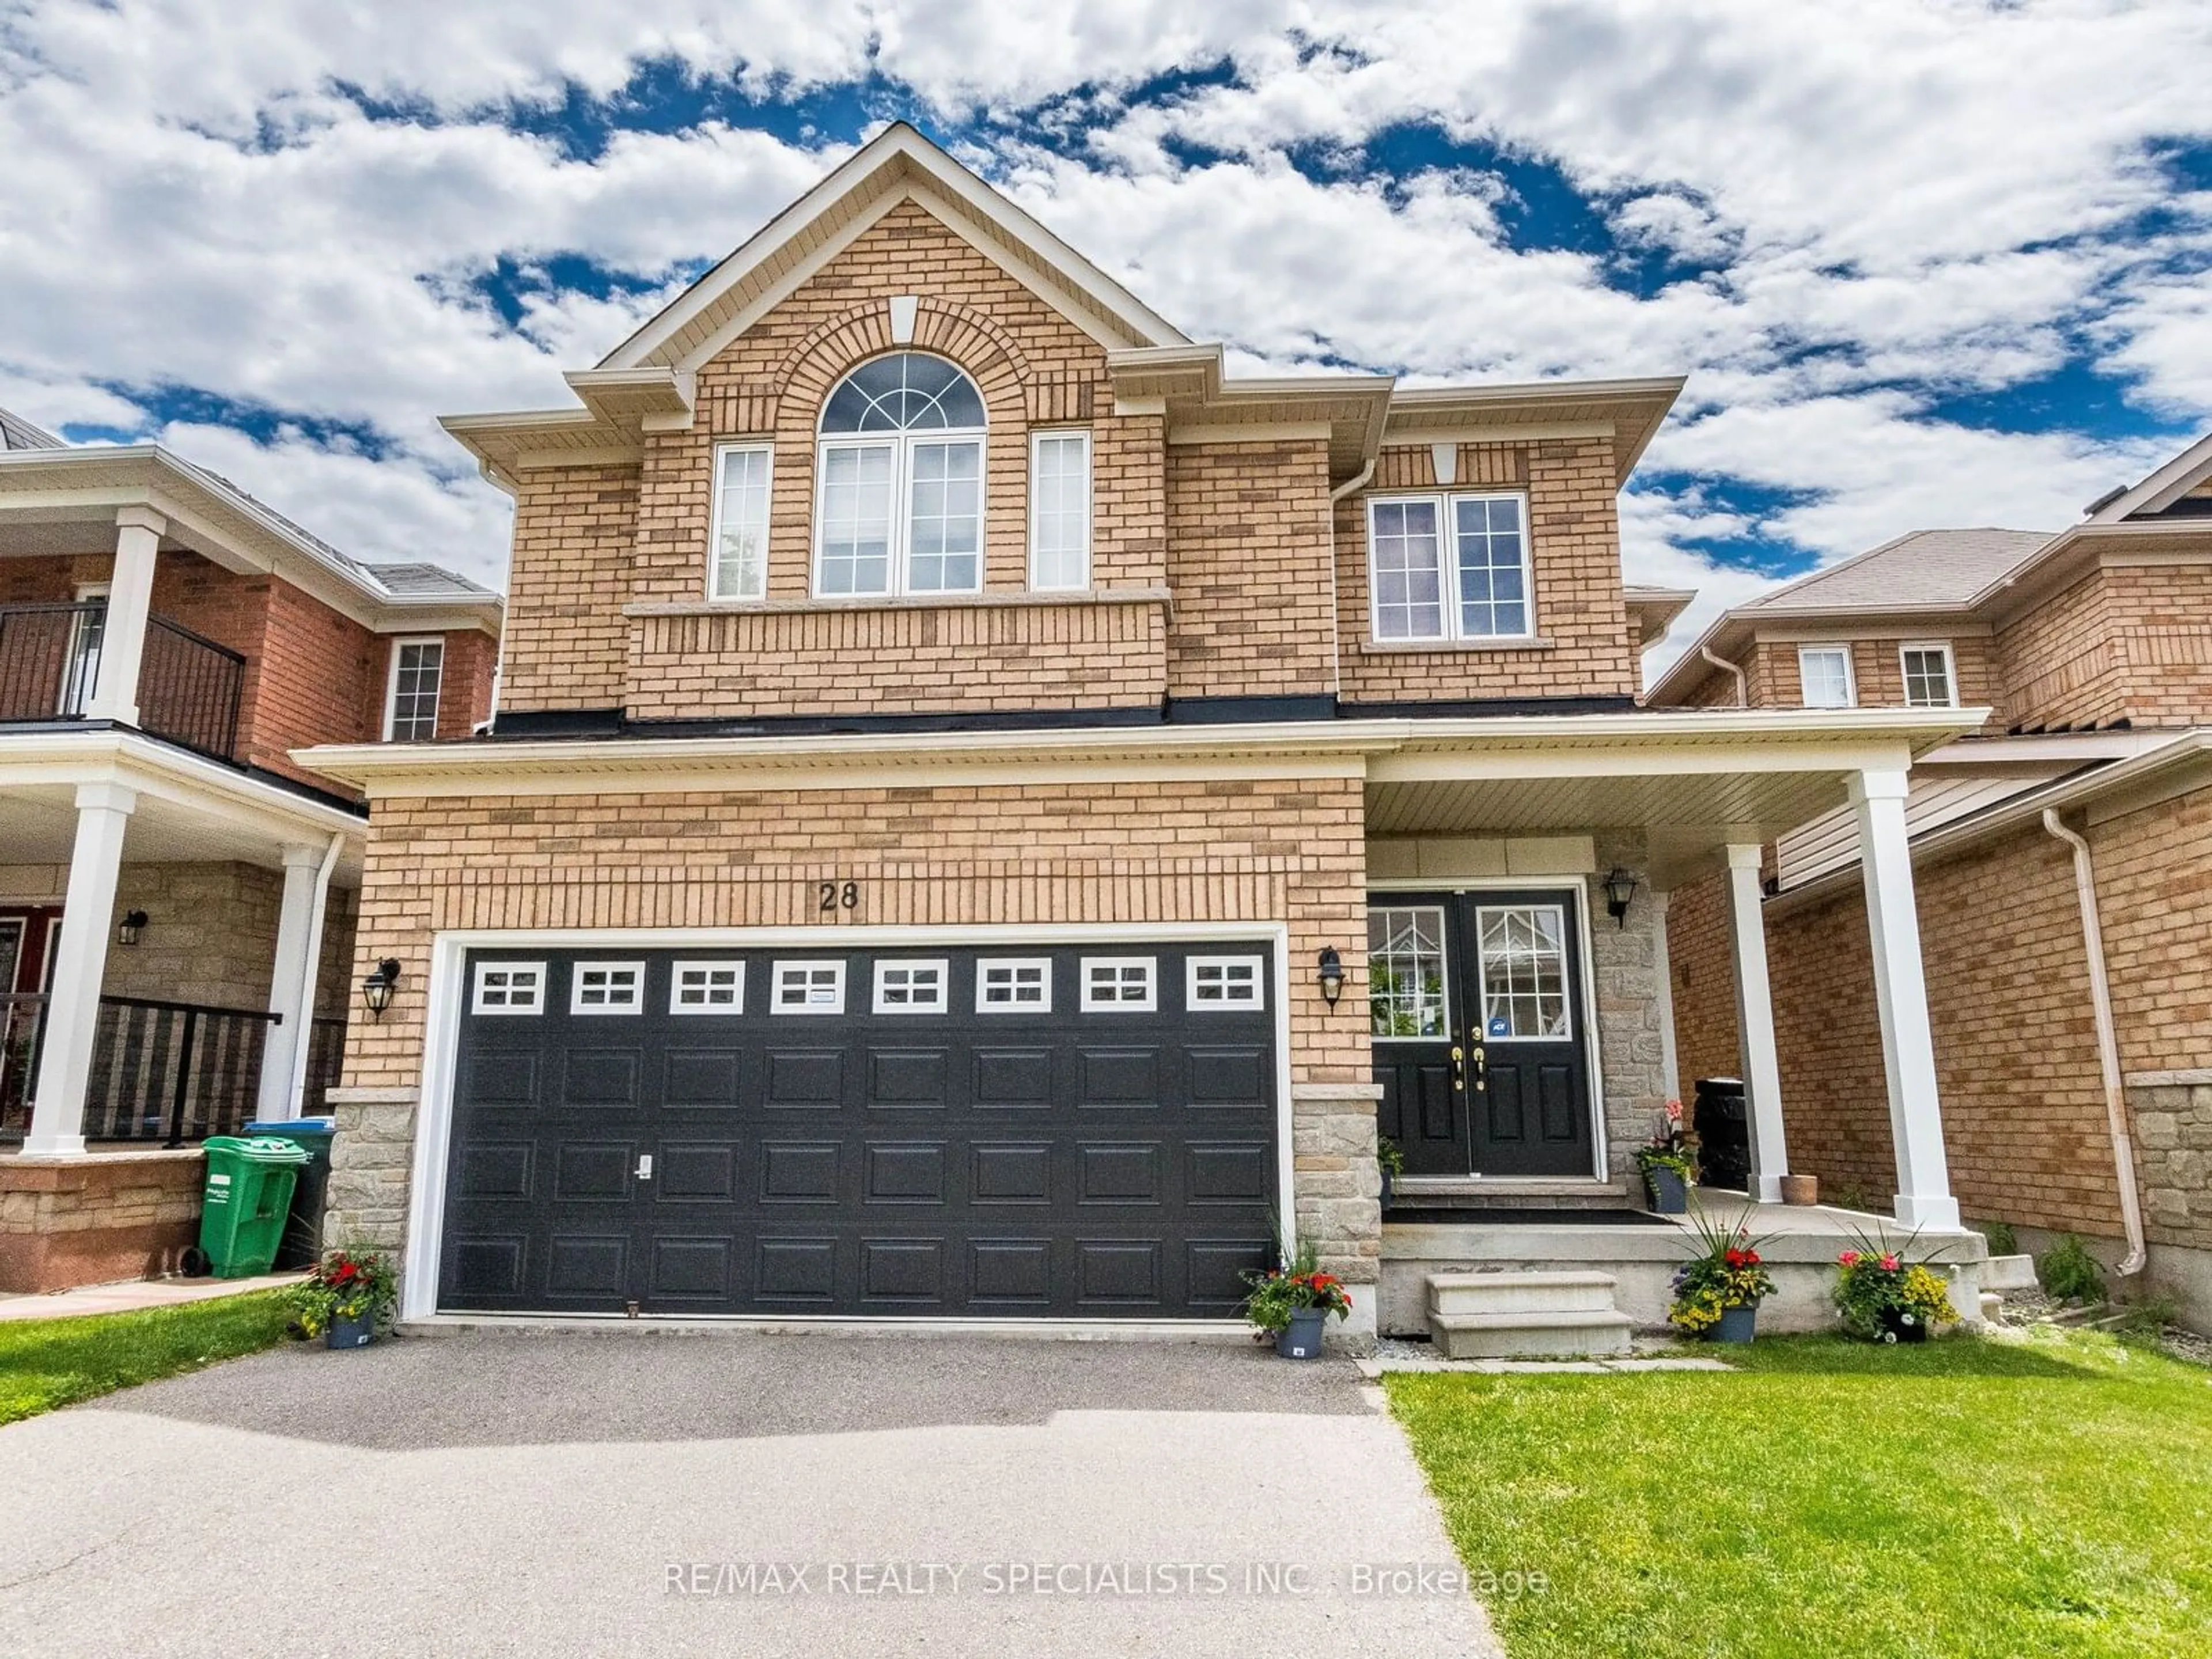 Home with brick exterior material for 28 Crystal Glen Cres, Brampton Ontario L6X 0K1